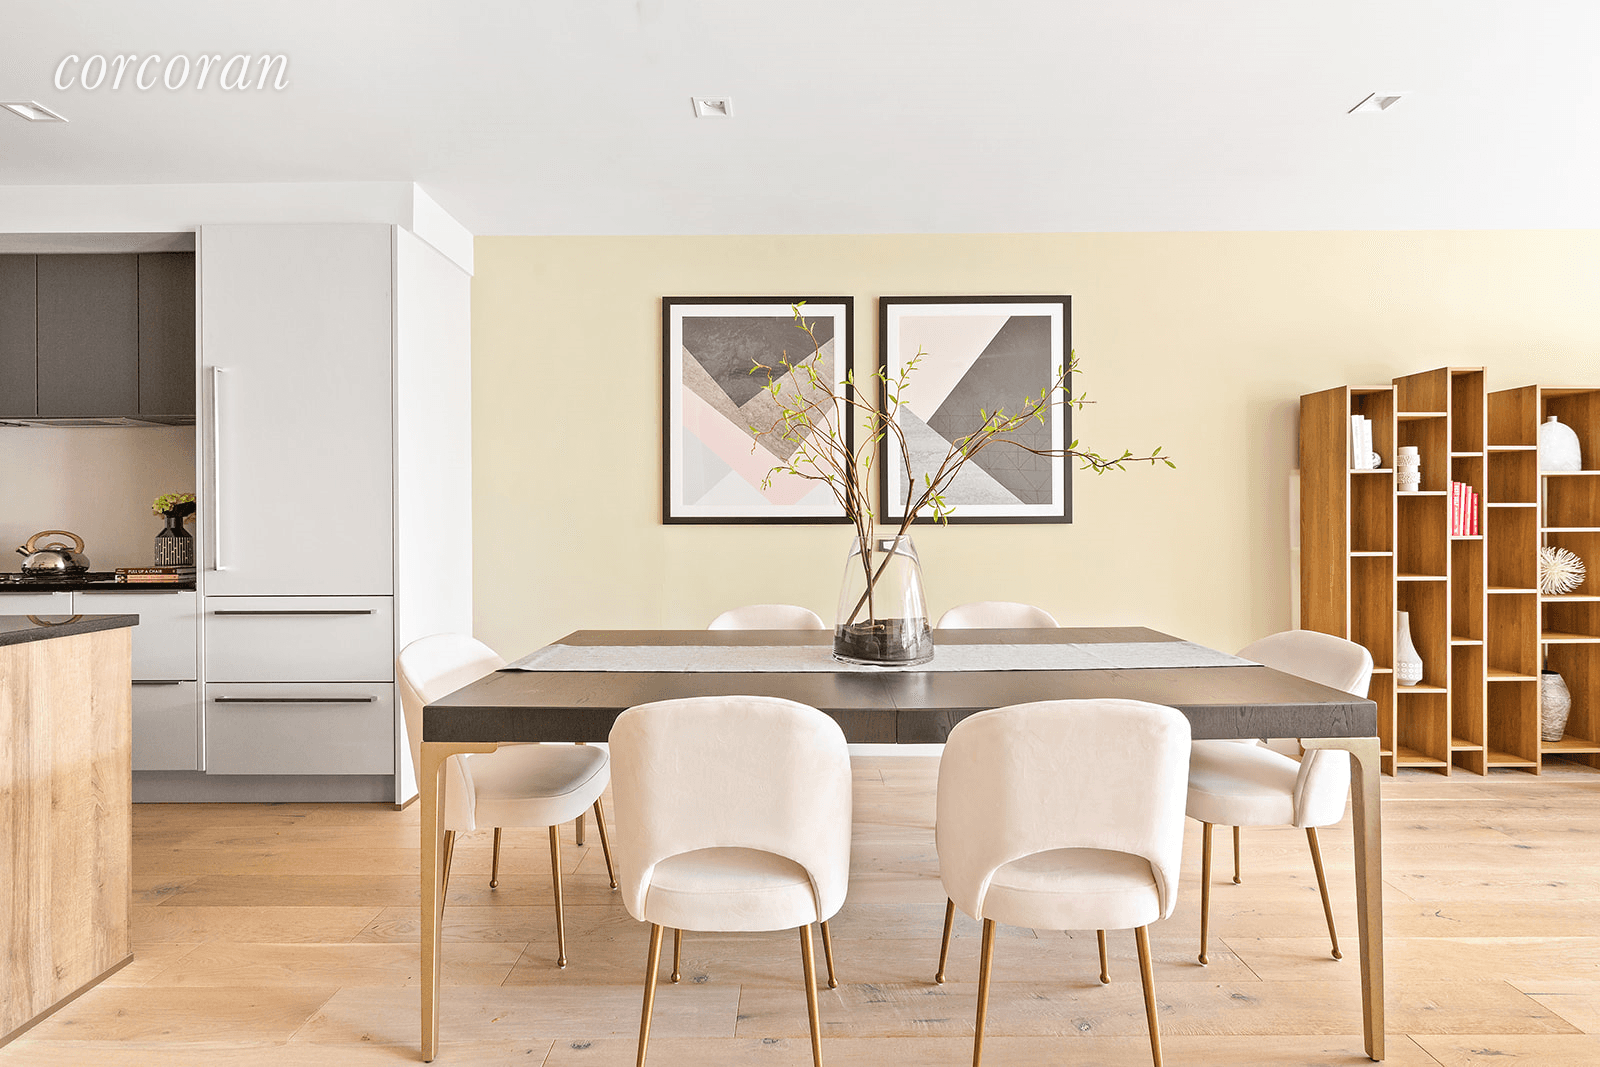 Welcome home to this sprawling 3 bedroom, 2 and a half bath condo with two private outdoor spaces and perfectly located on the border of Crown Heights and Prospect Heights.